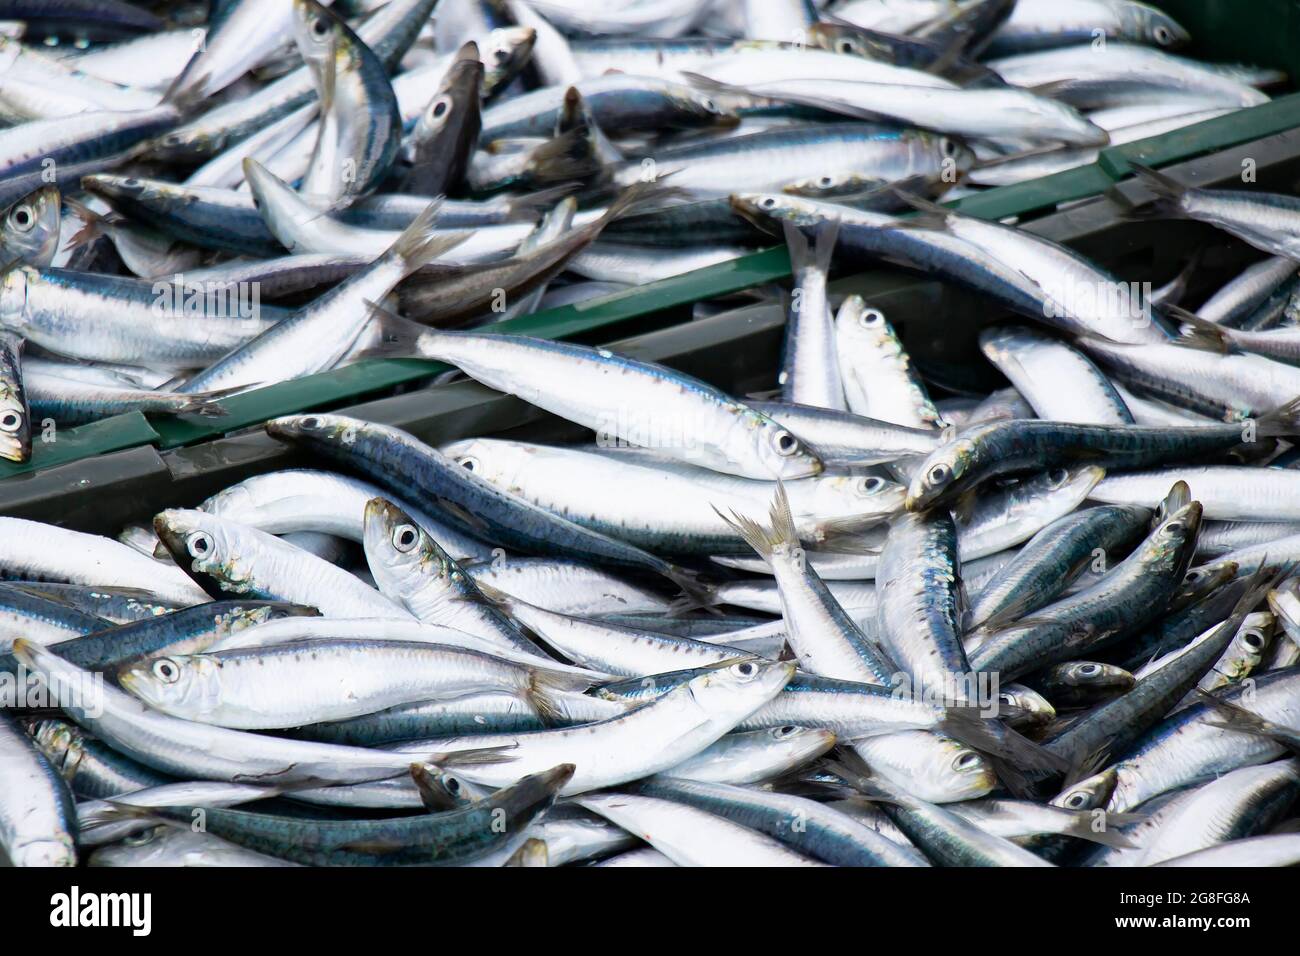 Fish catch, sardines,  in containers, closeup Stock Photo